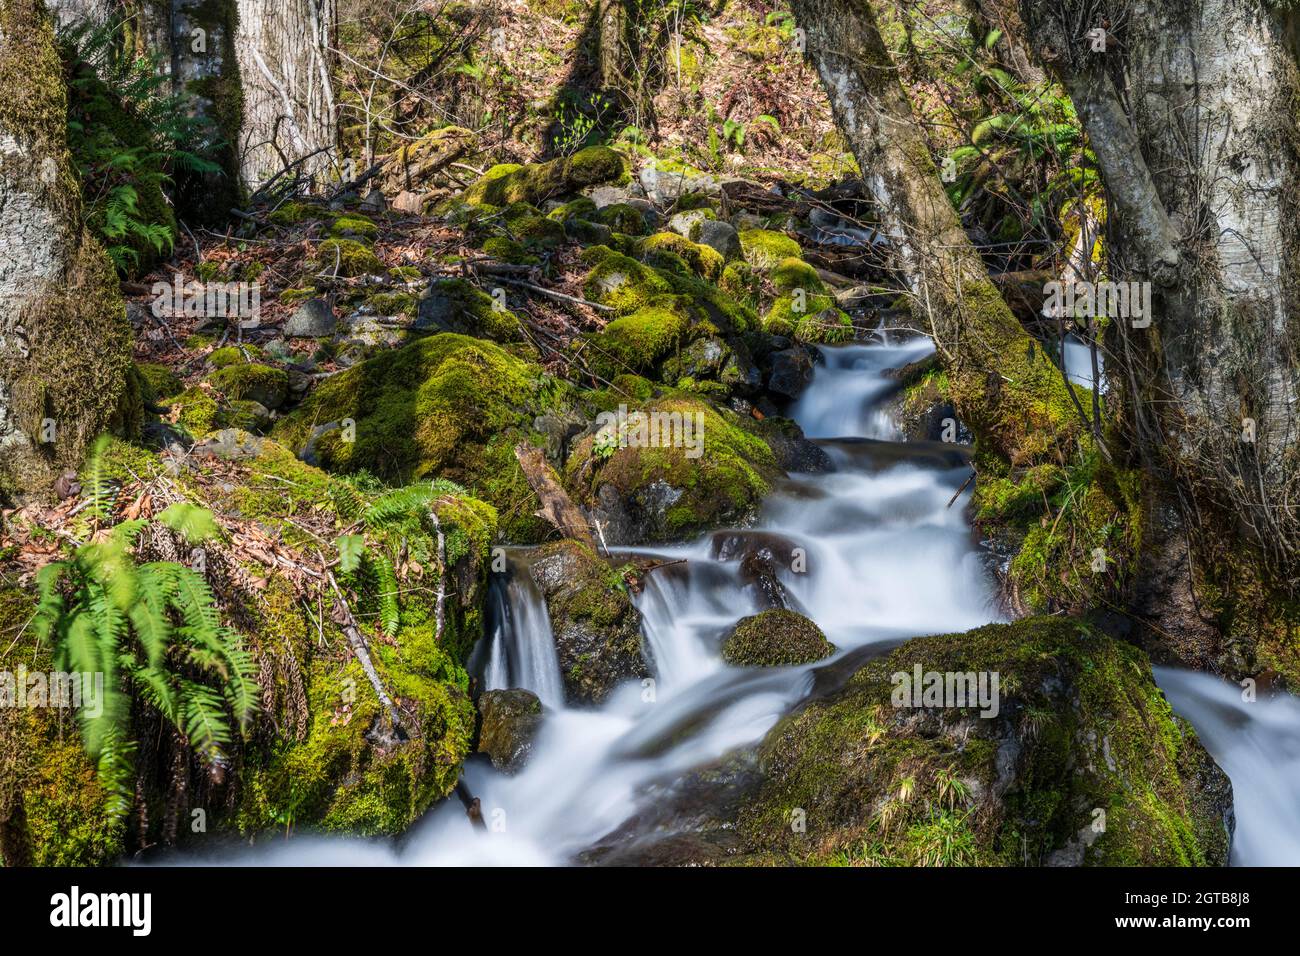 Stream Flowing Through Rocks In Forest Stock Photo